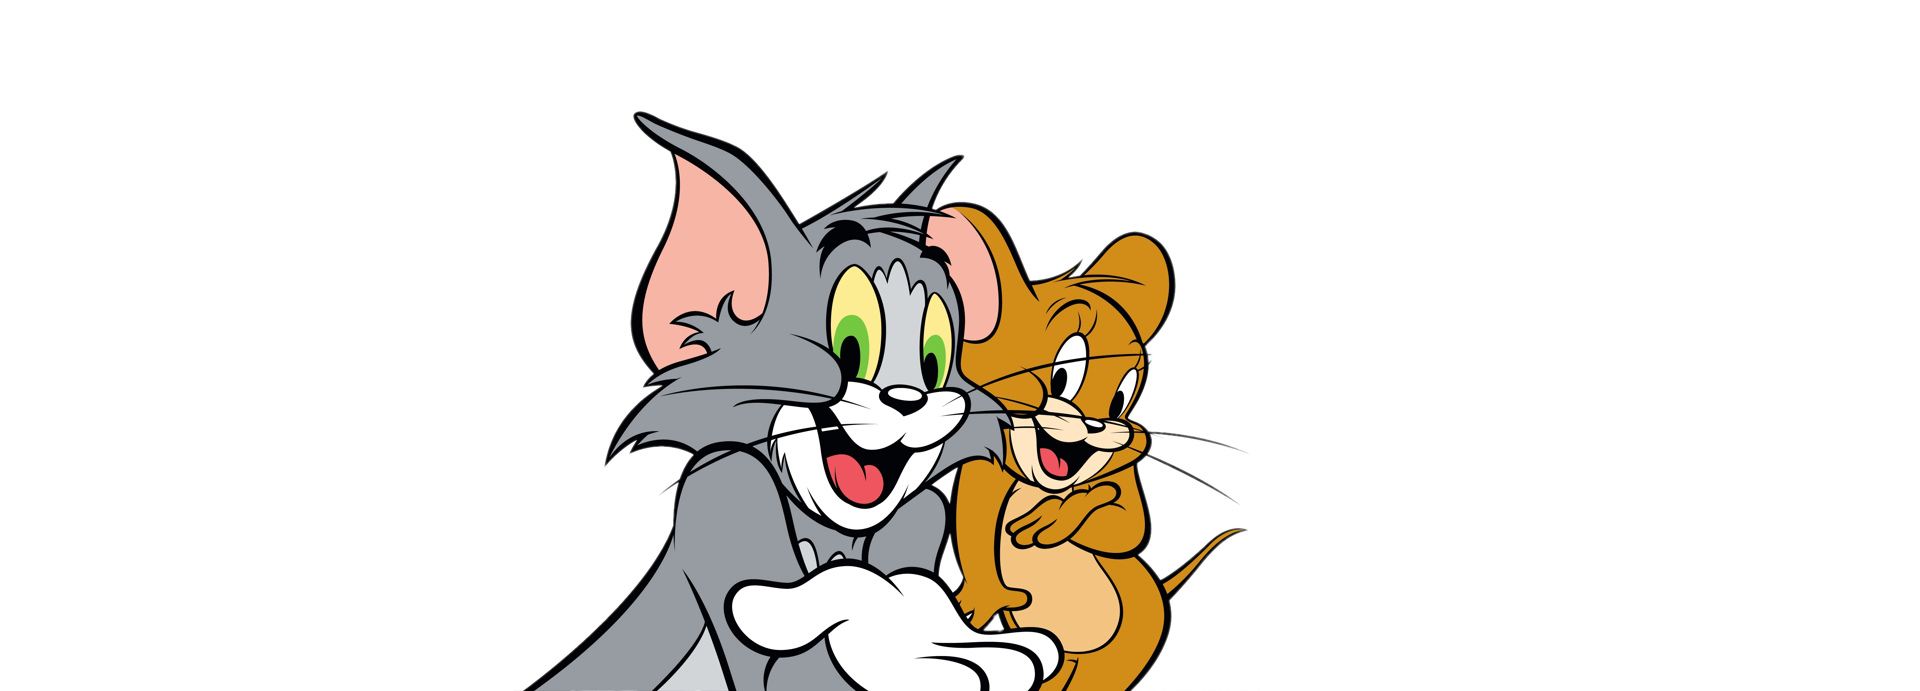 tom and jerry fast and furious full movie in tamil download